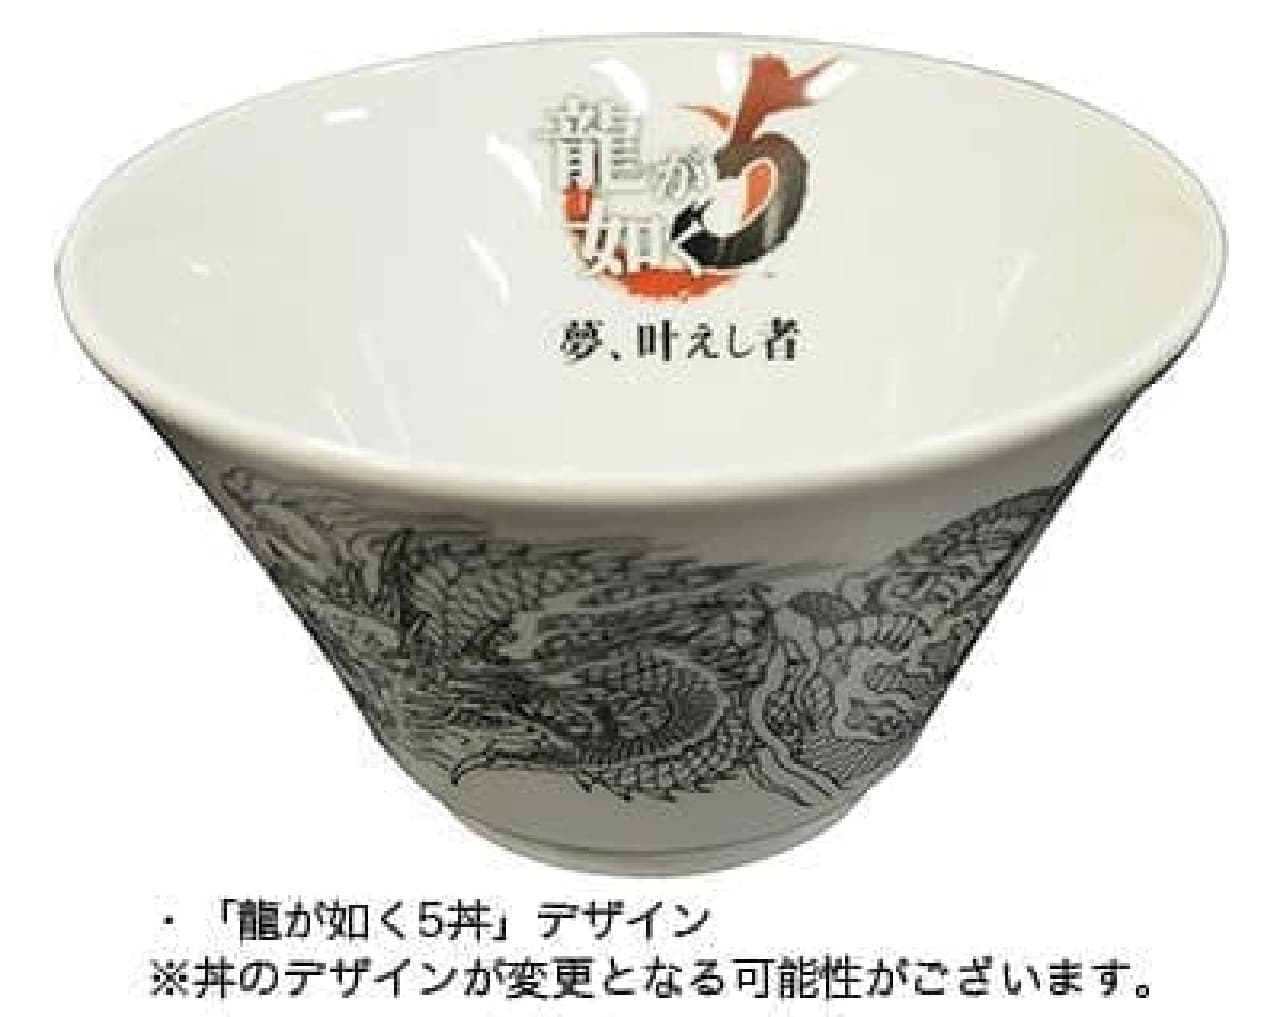 The bowl is also manly!